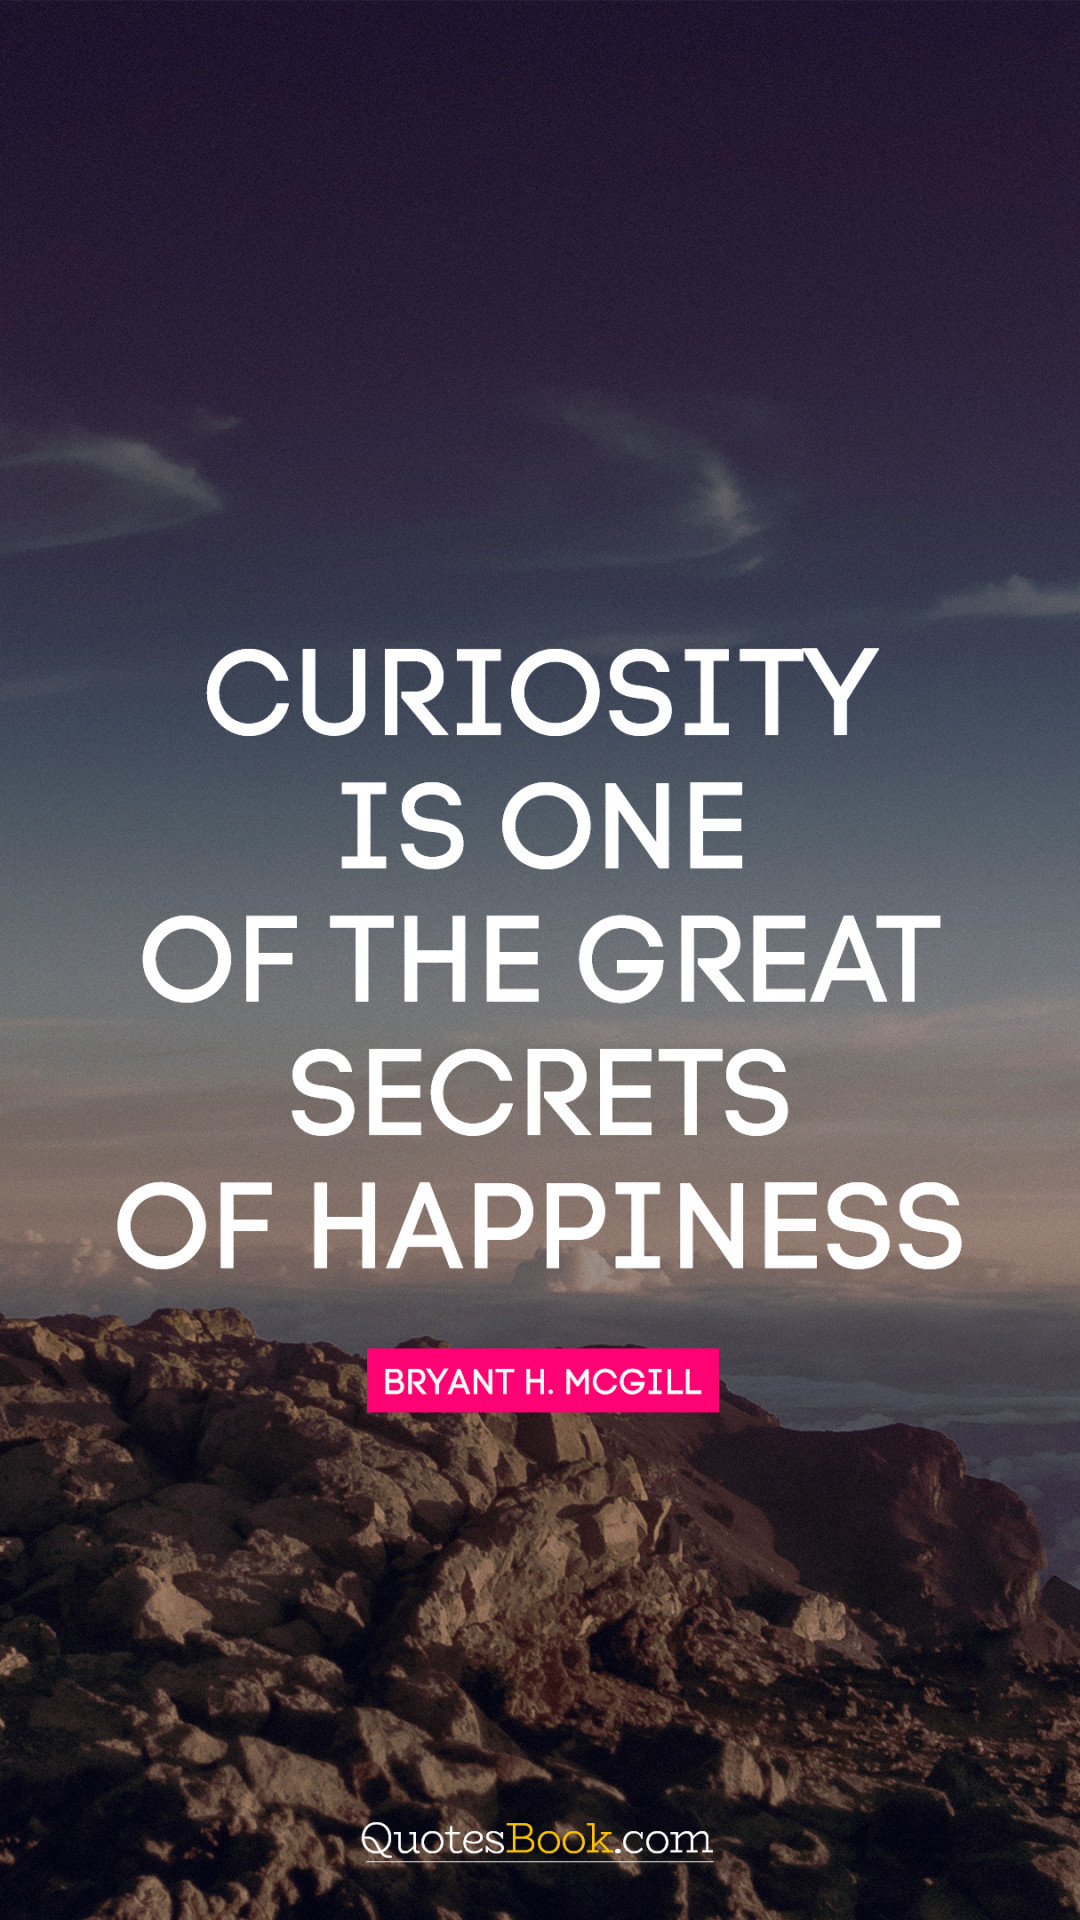 Curiosity is one of the great secrets of happiness. - Quote by Bryant H